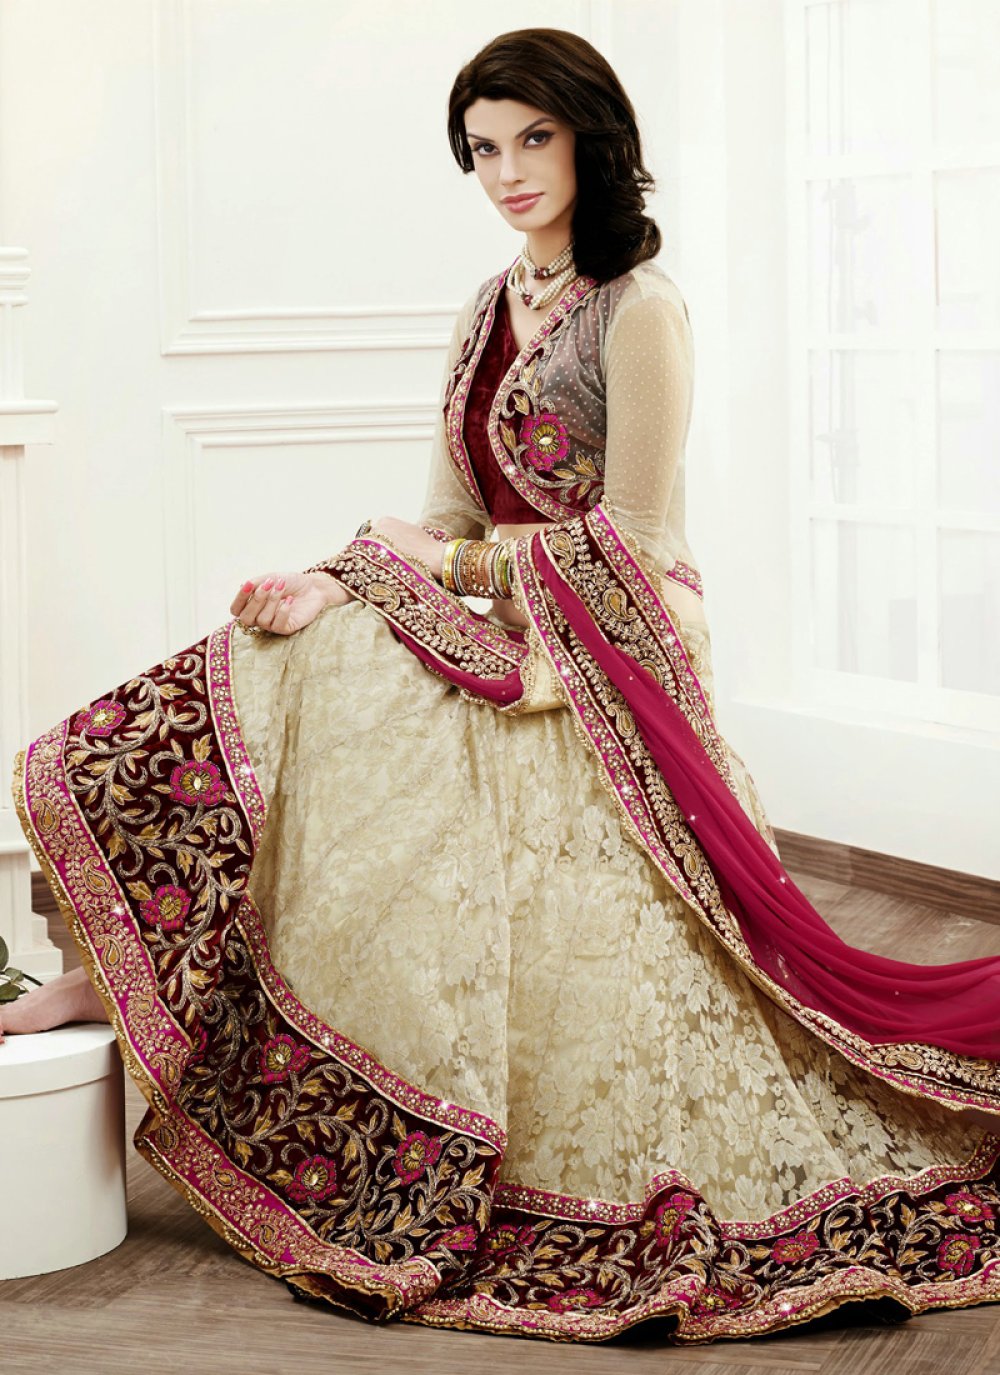 Embroidered Attractive Party Wear Silk Lehenga choli has a Regular-fit and  is Made From High-Grade Fabrics And Yarn.